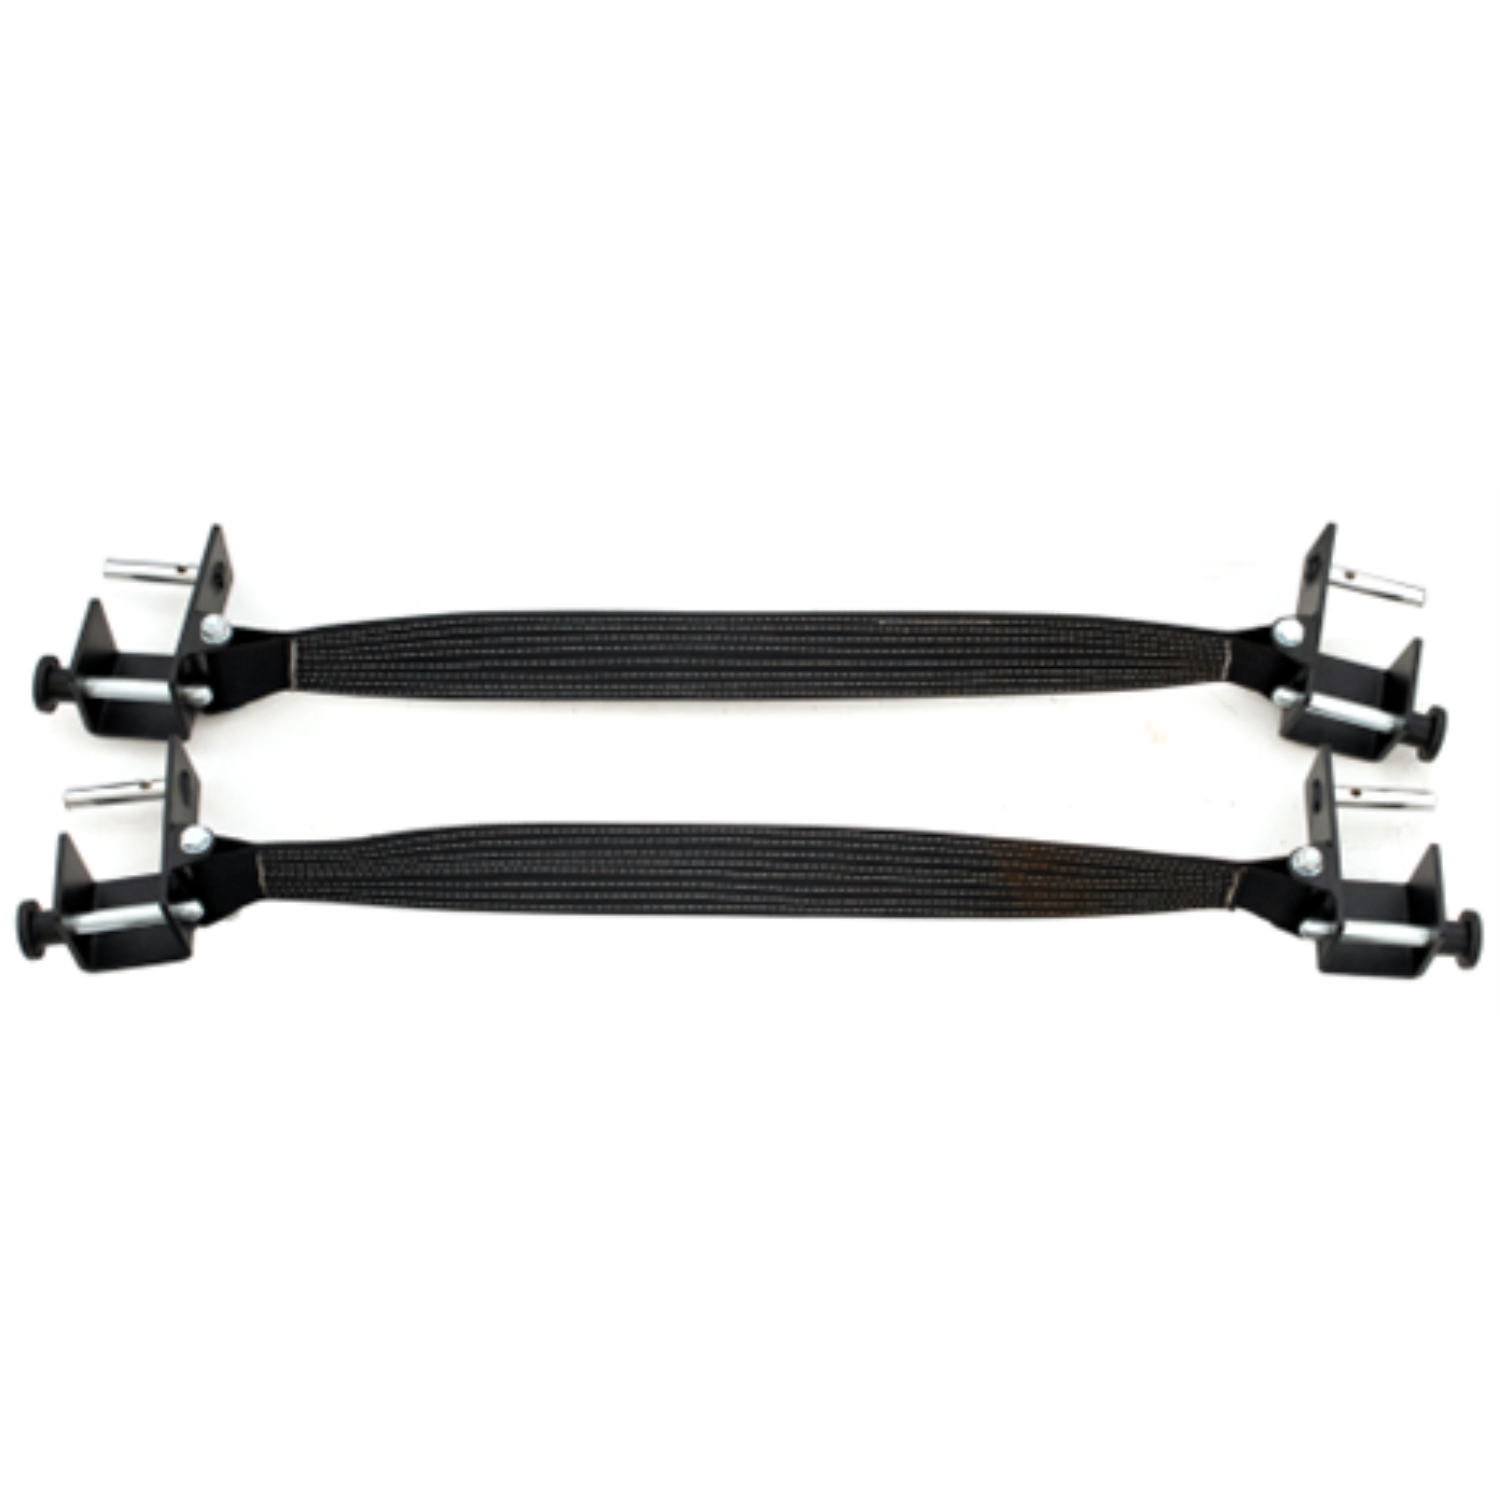 Muscle Motion PR1012 Safety Strap System Attachment-Gym Direct